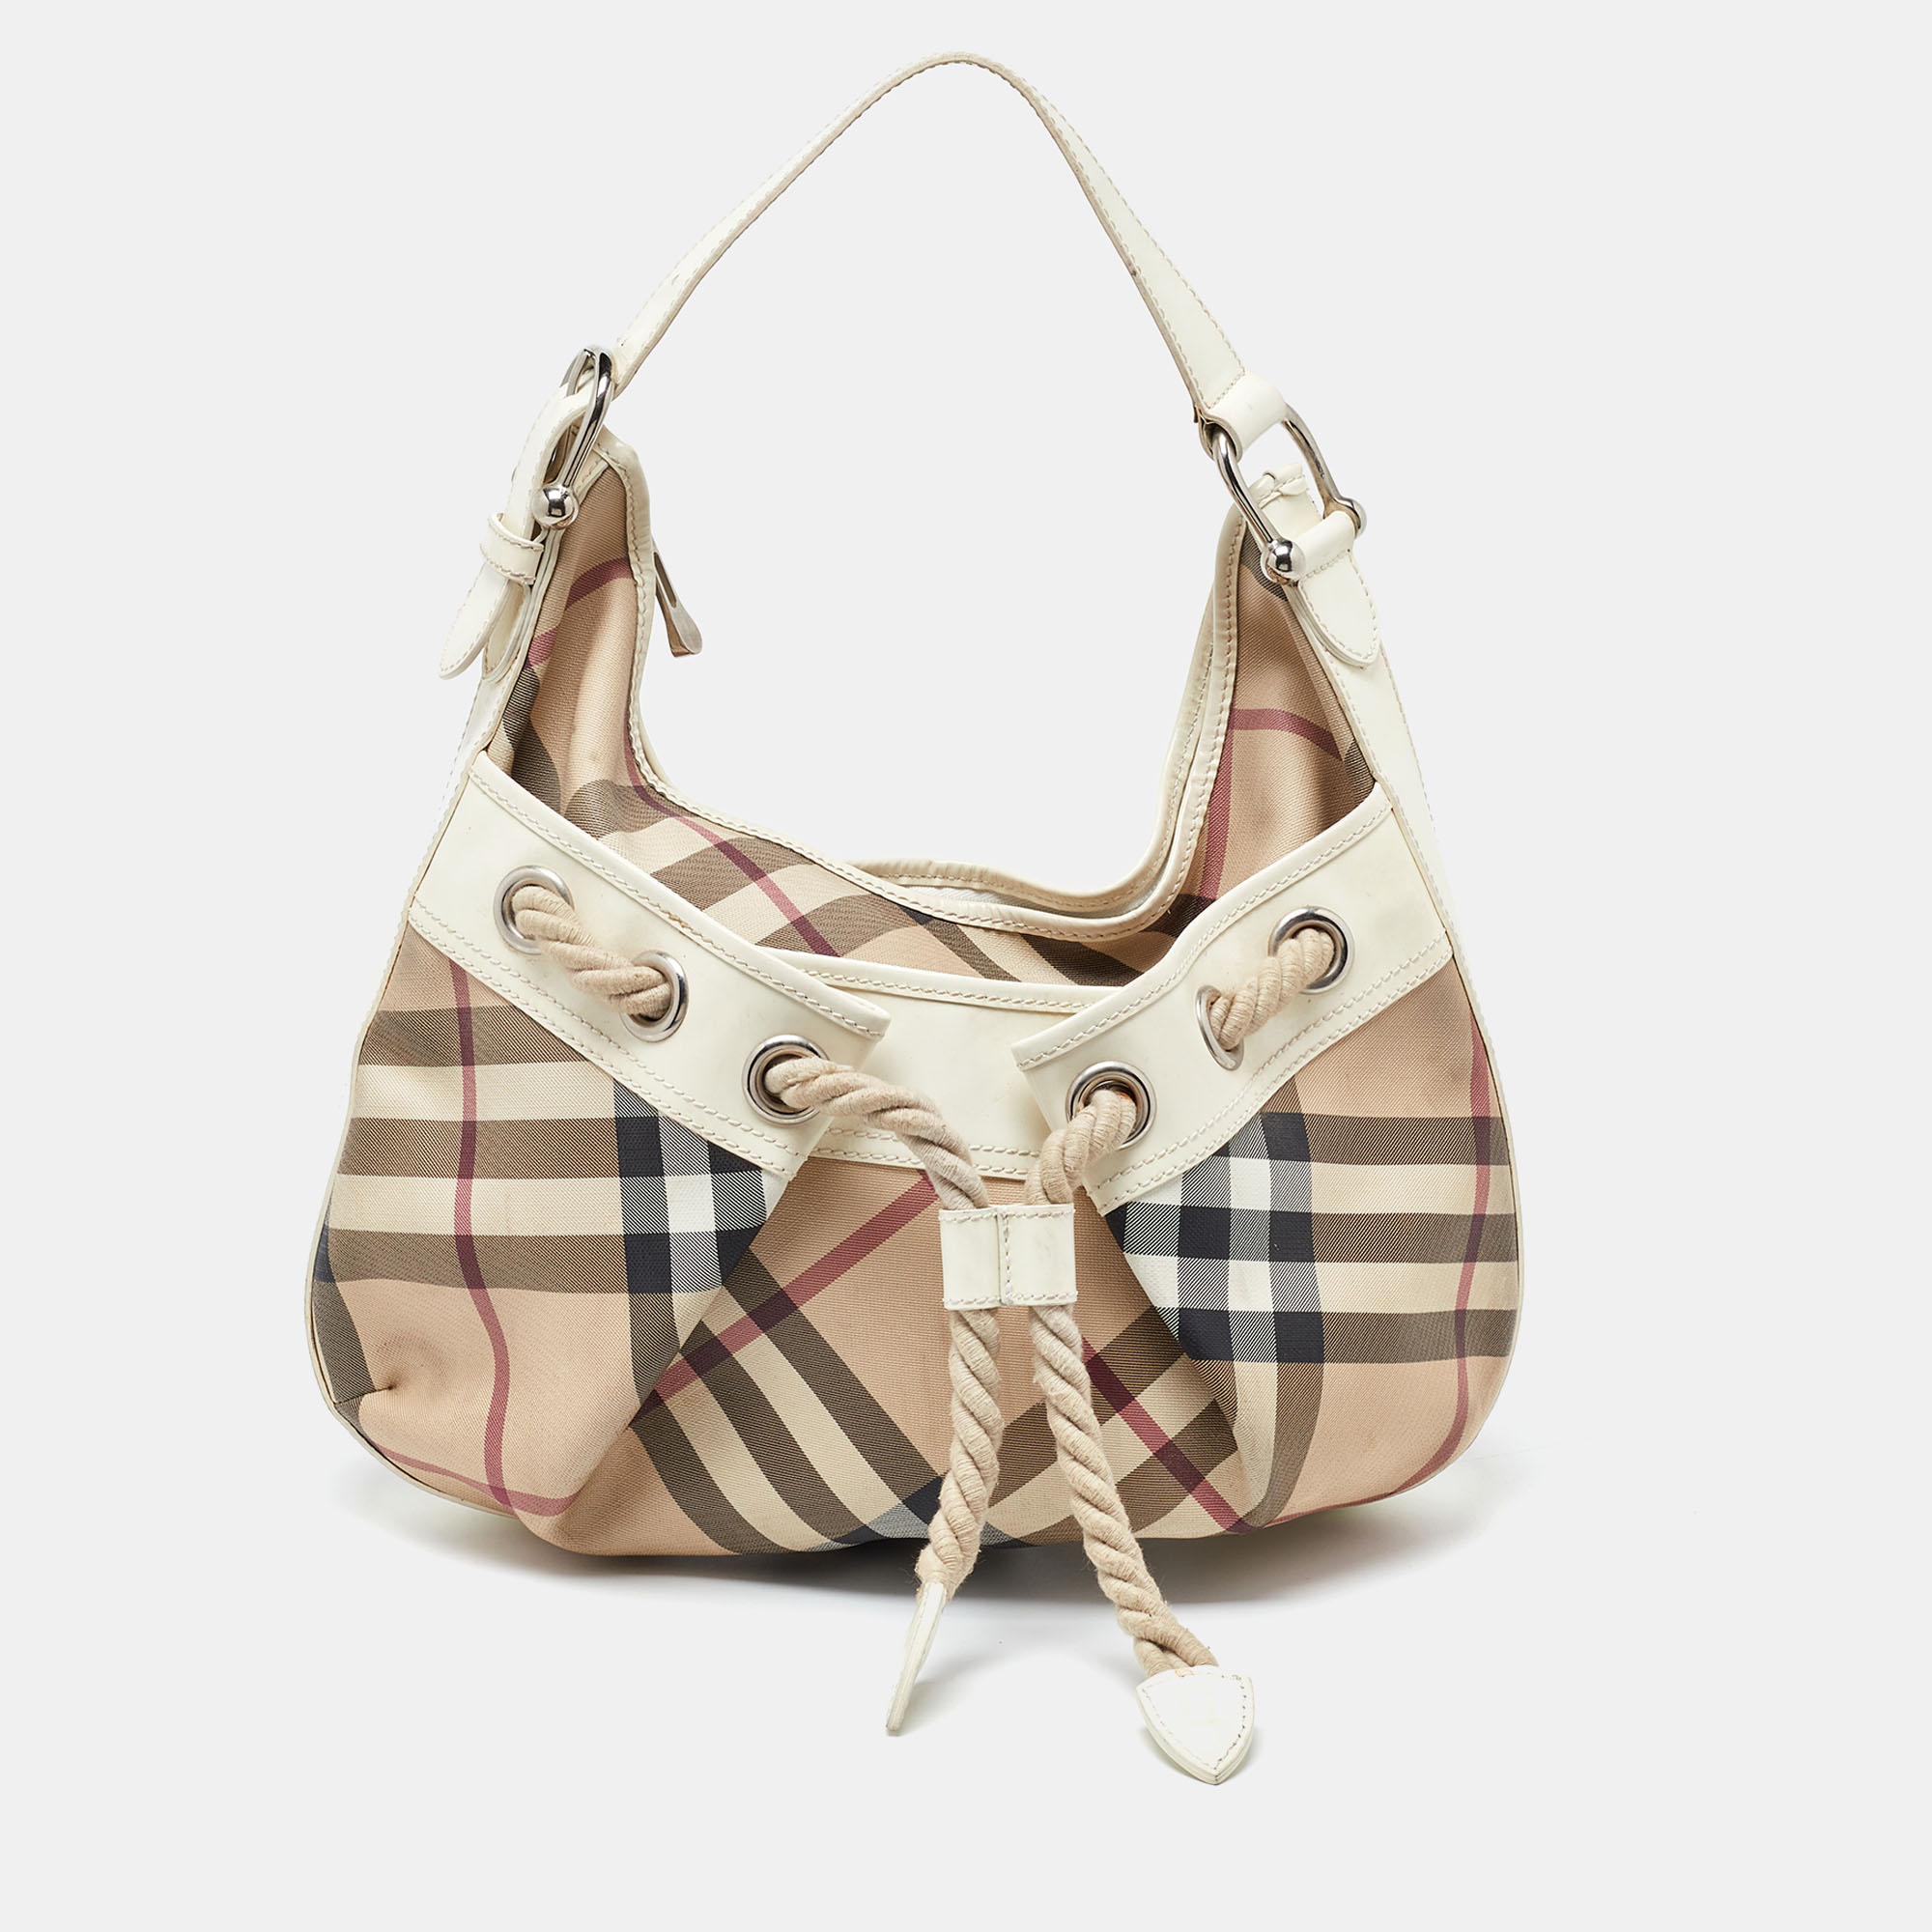 Burberry beige/off white nova check pvc and patent leather hobo